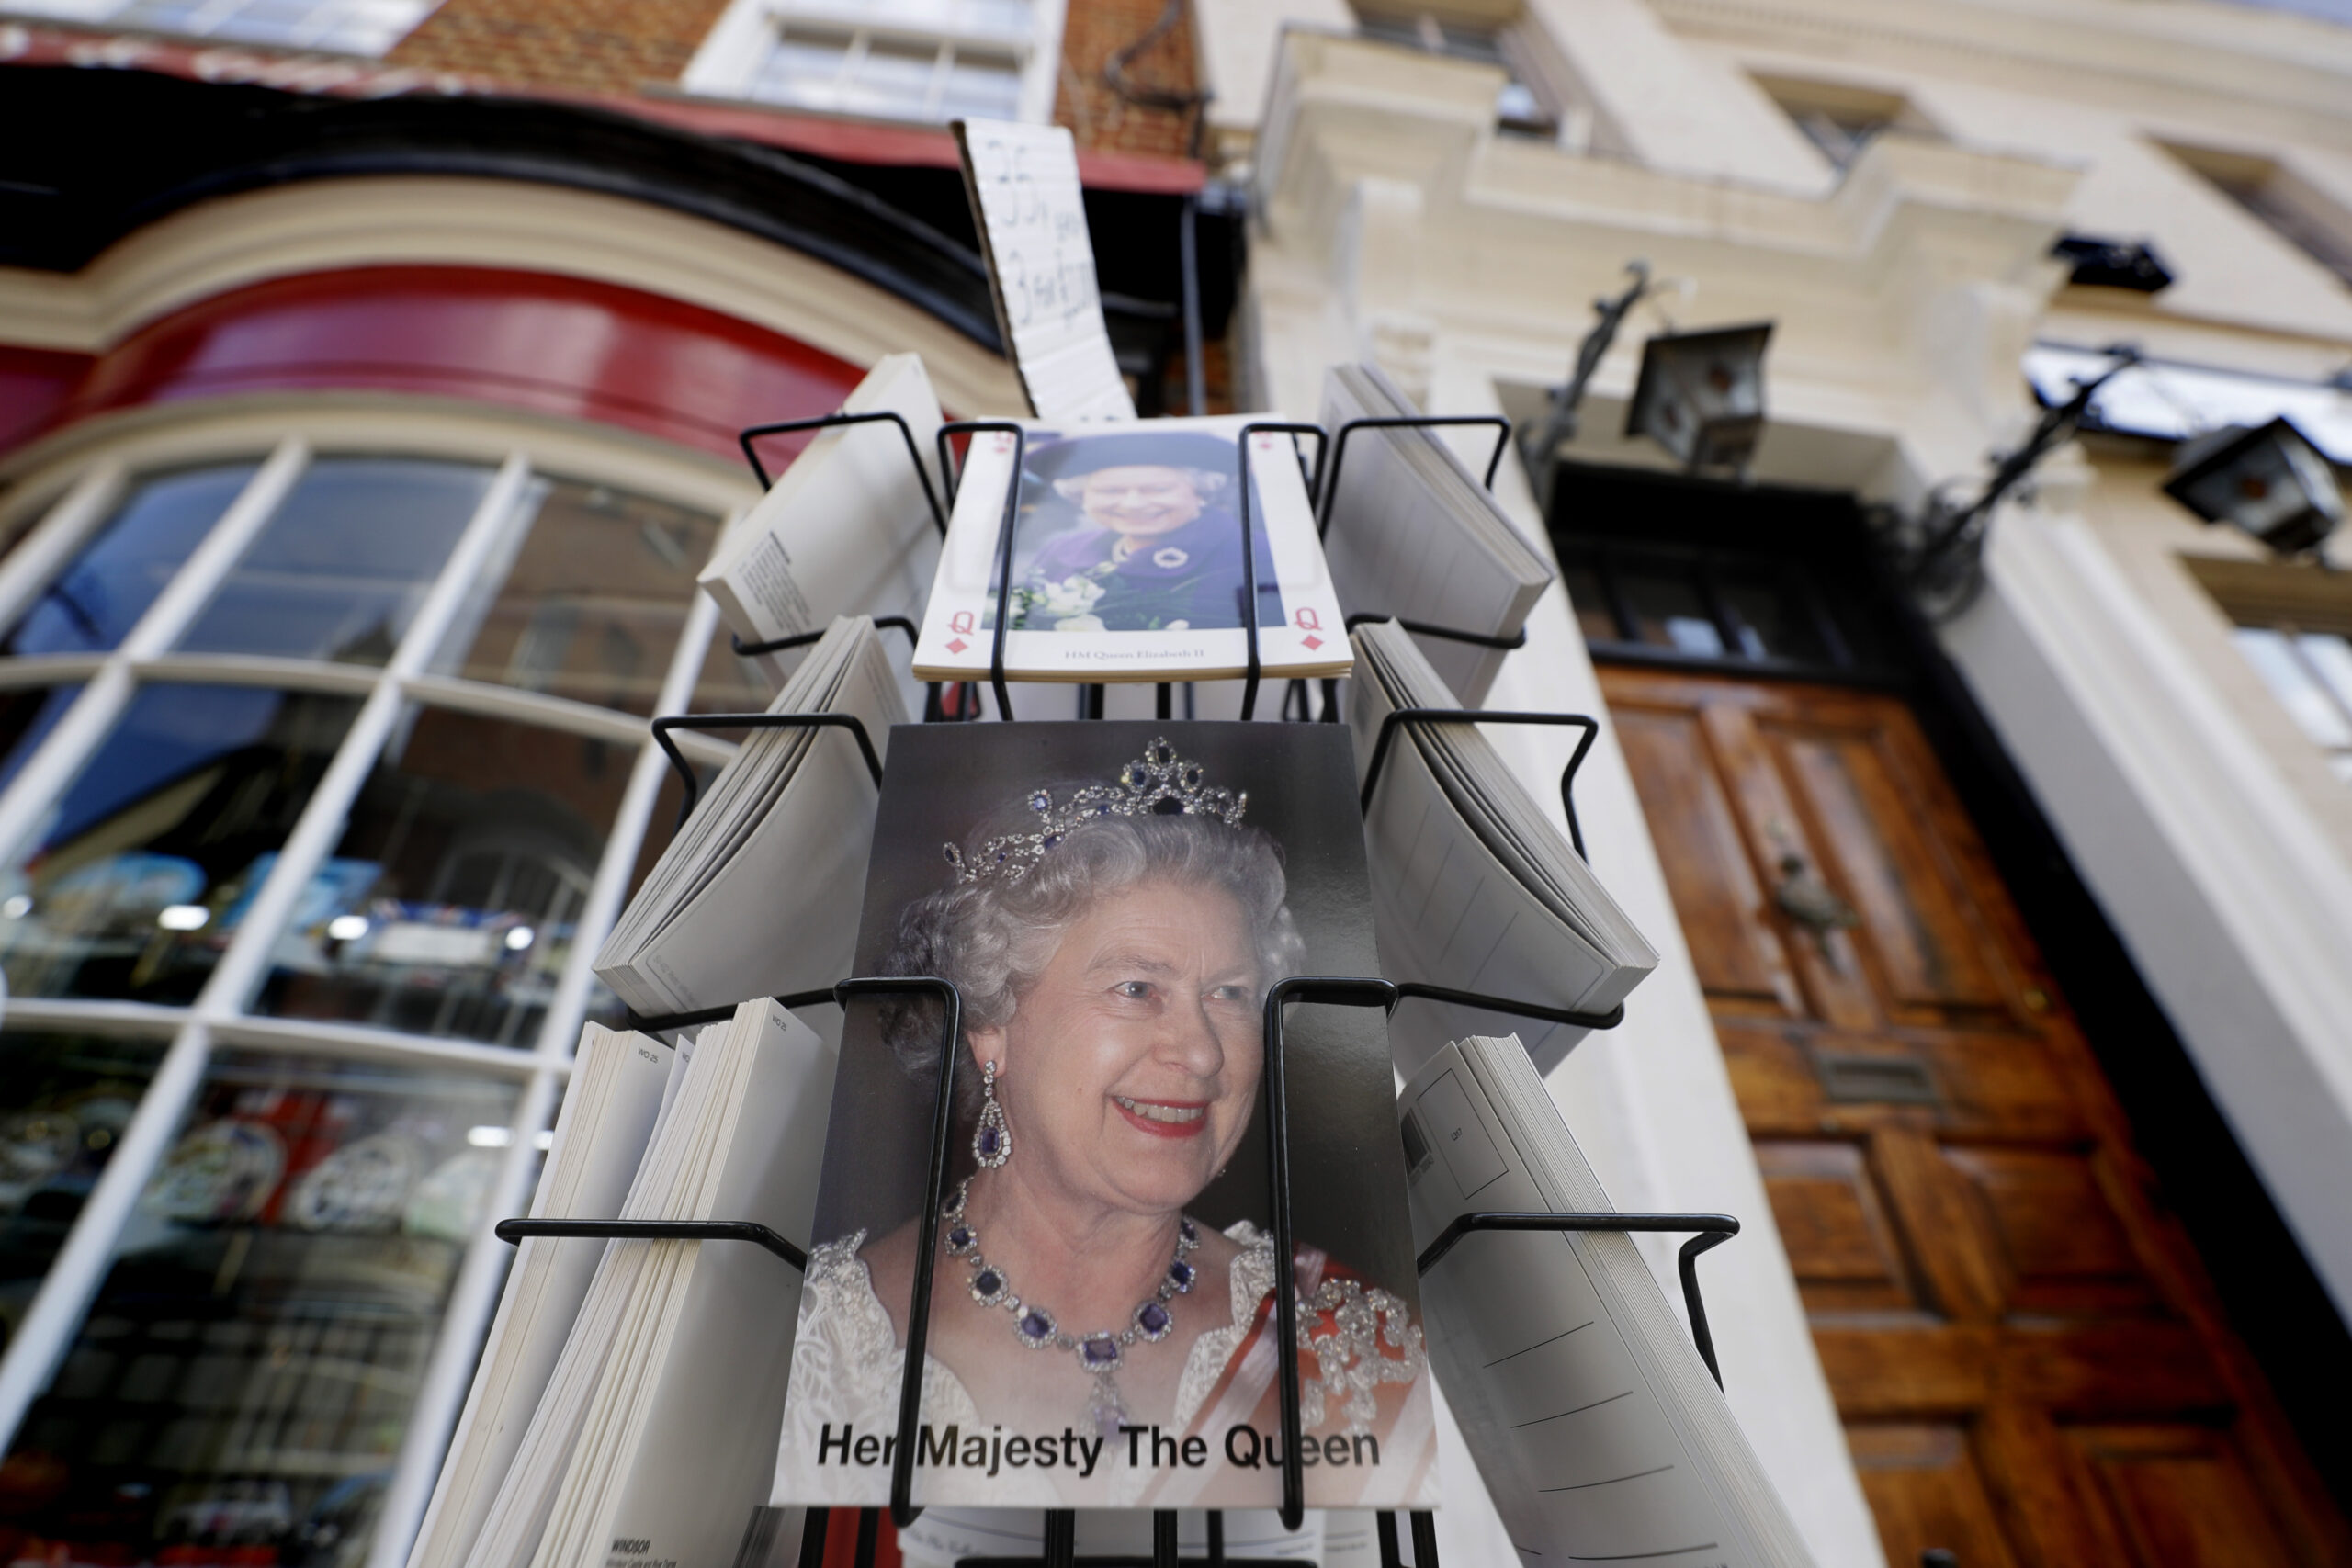 Postcards with pictures of Queen Elizabeth II for sale in Windsor, England Wednesday, April 21, 2021. Britain's Queen Elizabeth II is marking her 95th birthday in a low-key fashion at Windsor Castle, just days after the funeral of her husband Prince Philip. Some members of the royal family are expected to be with the queen on Wednesday. Her birthday falls within the two-week royal mourning period for Philip that is being observed until Friday. (AP Photo/Kirsty Wigglesworth)